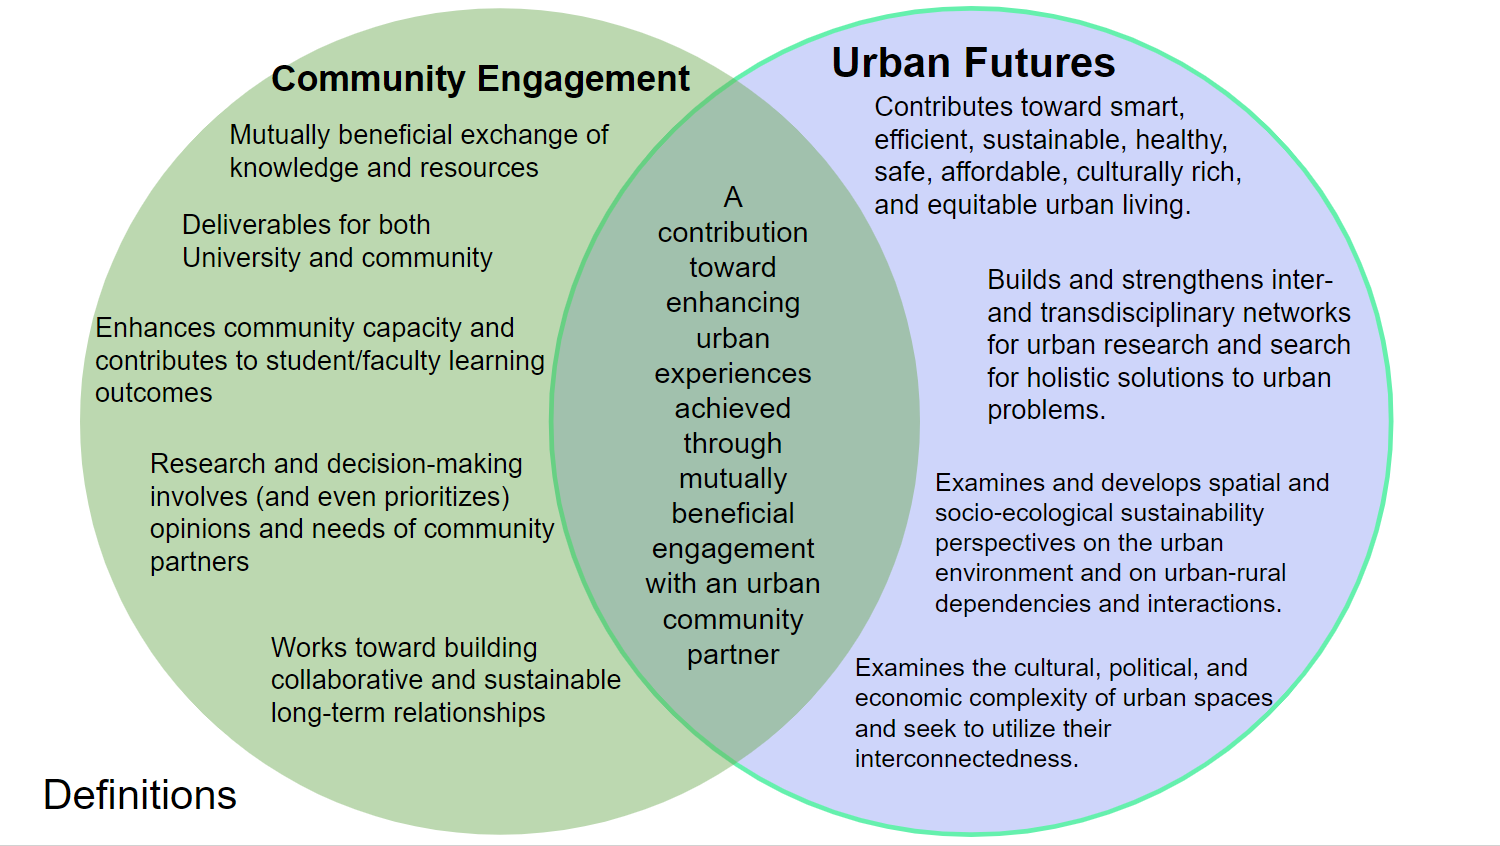 venn diagram depicting the differences and similarities between community engagement and urban futures